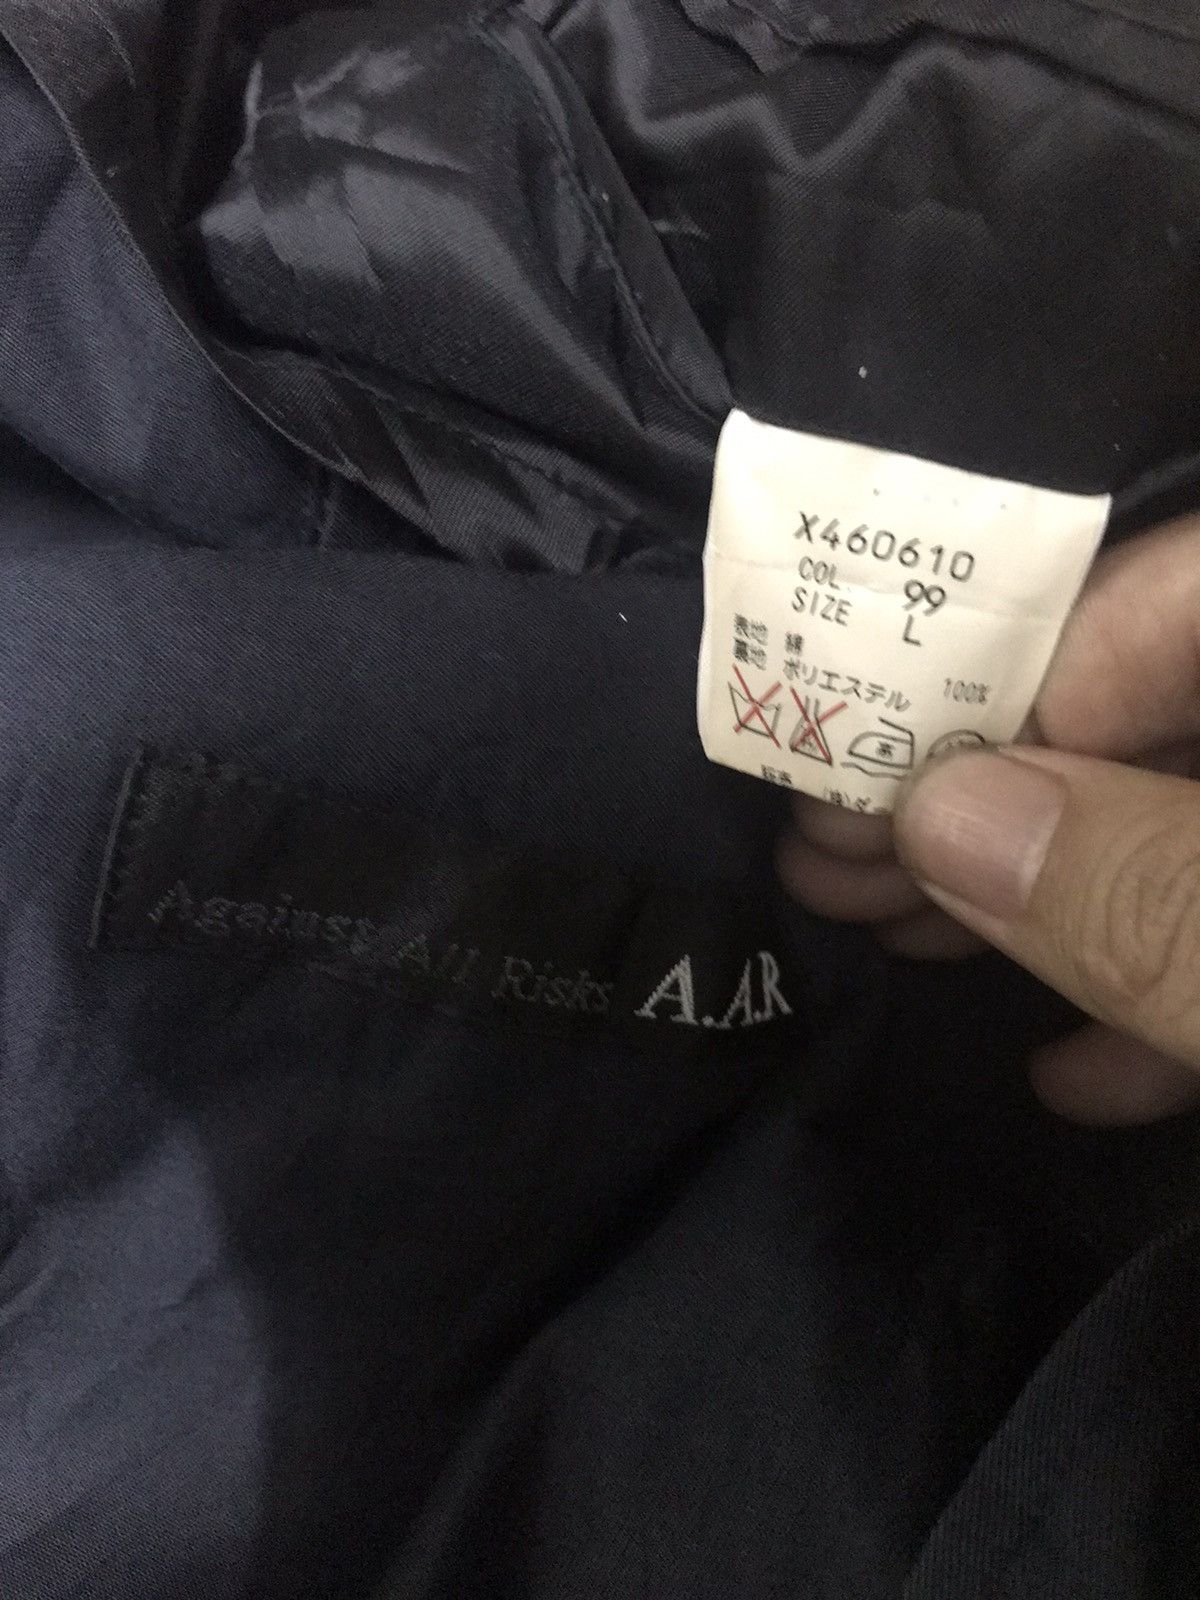 Yohji Yamamoto Against All Risk (A.R.R )Trench Coat - 10